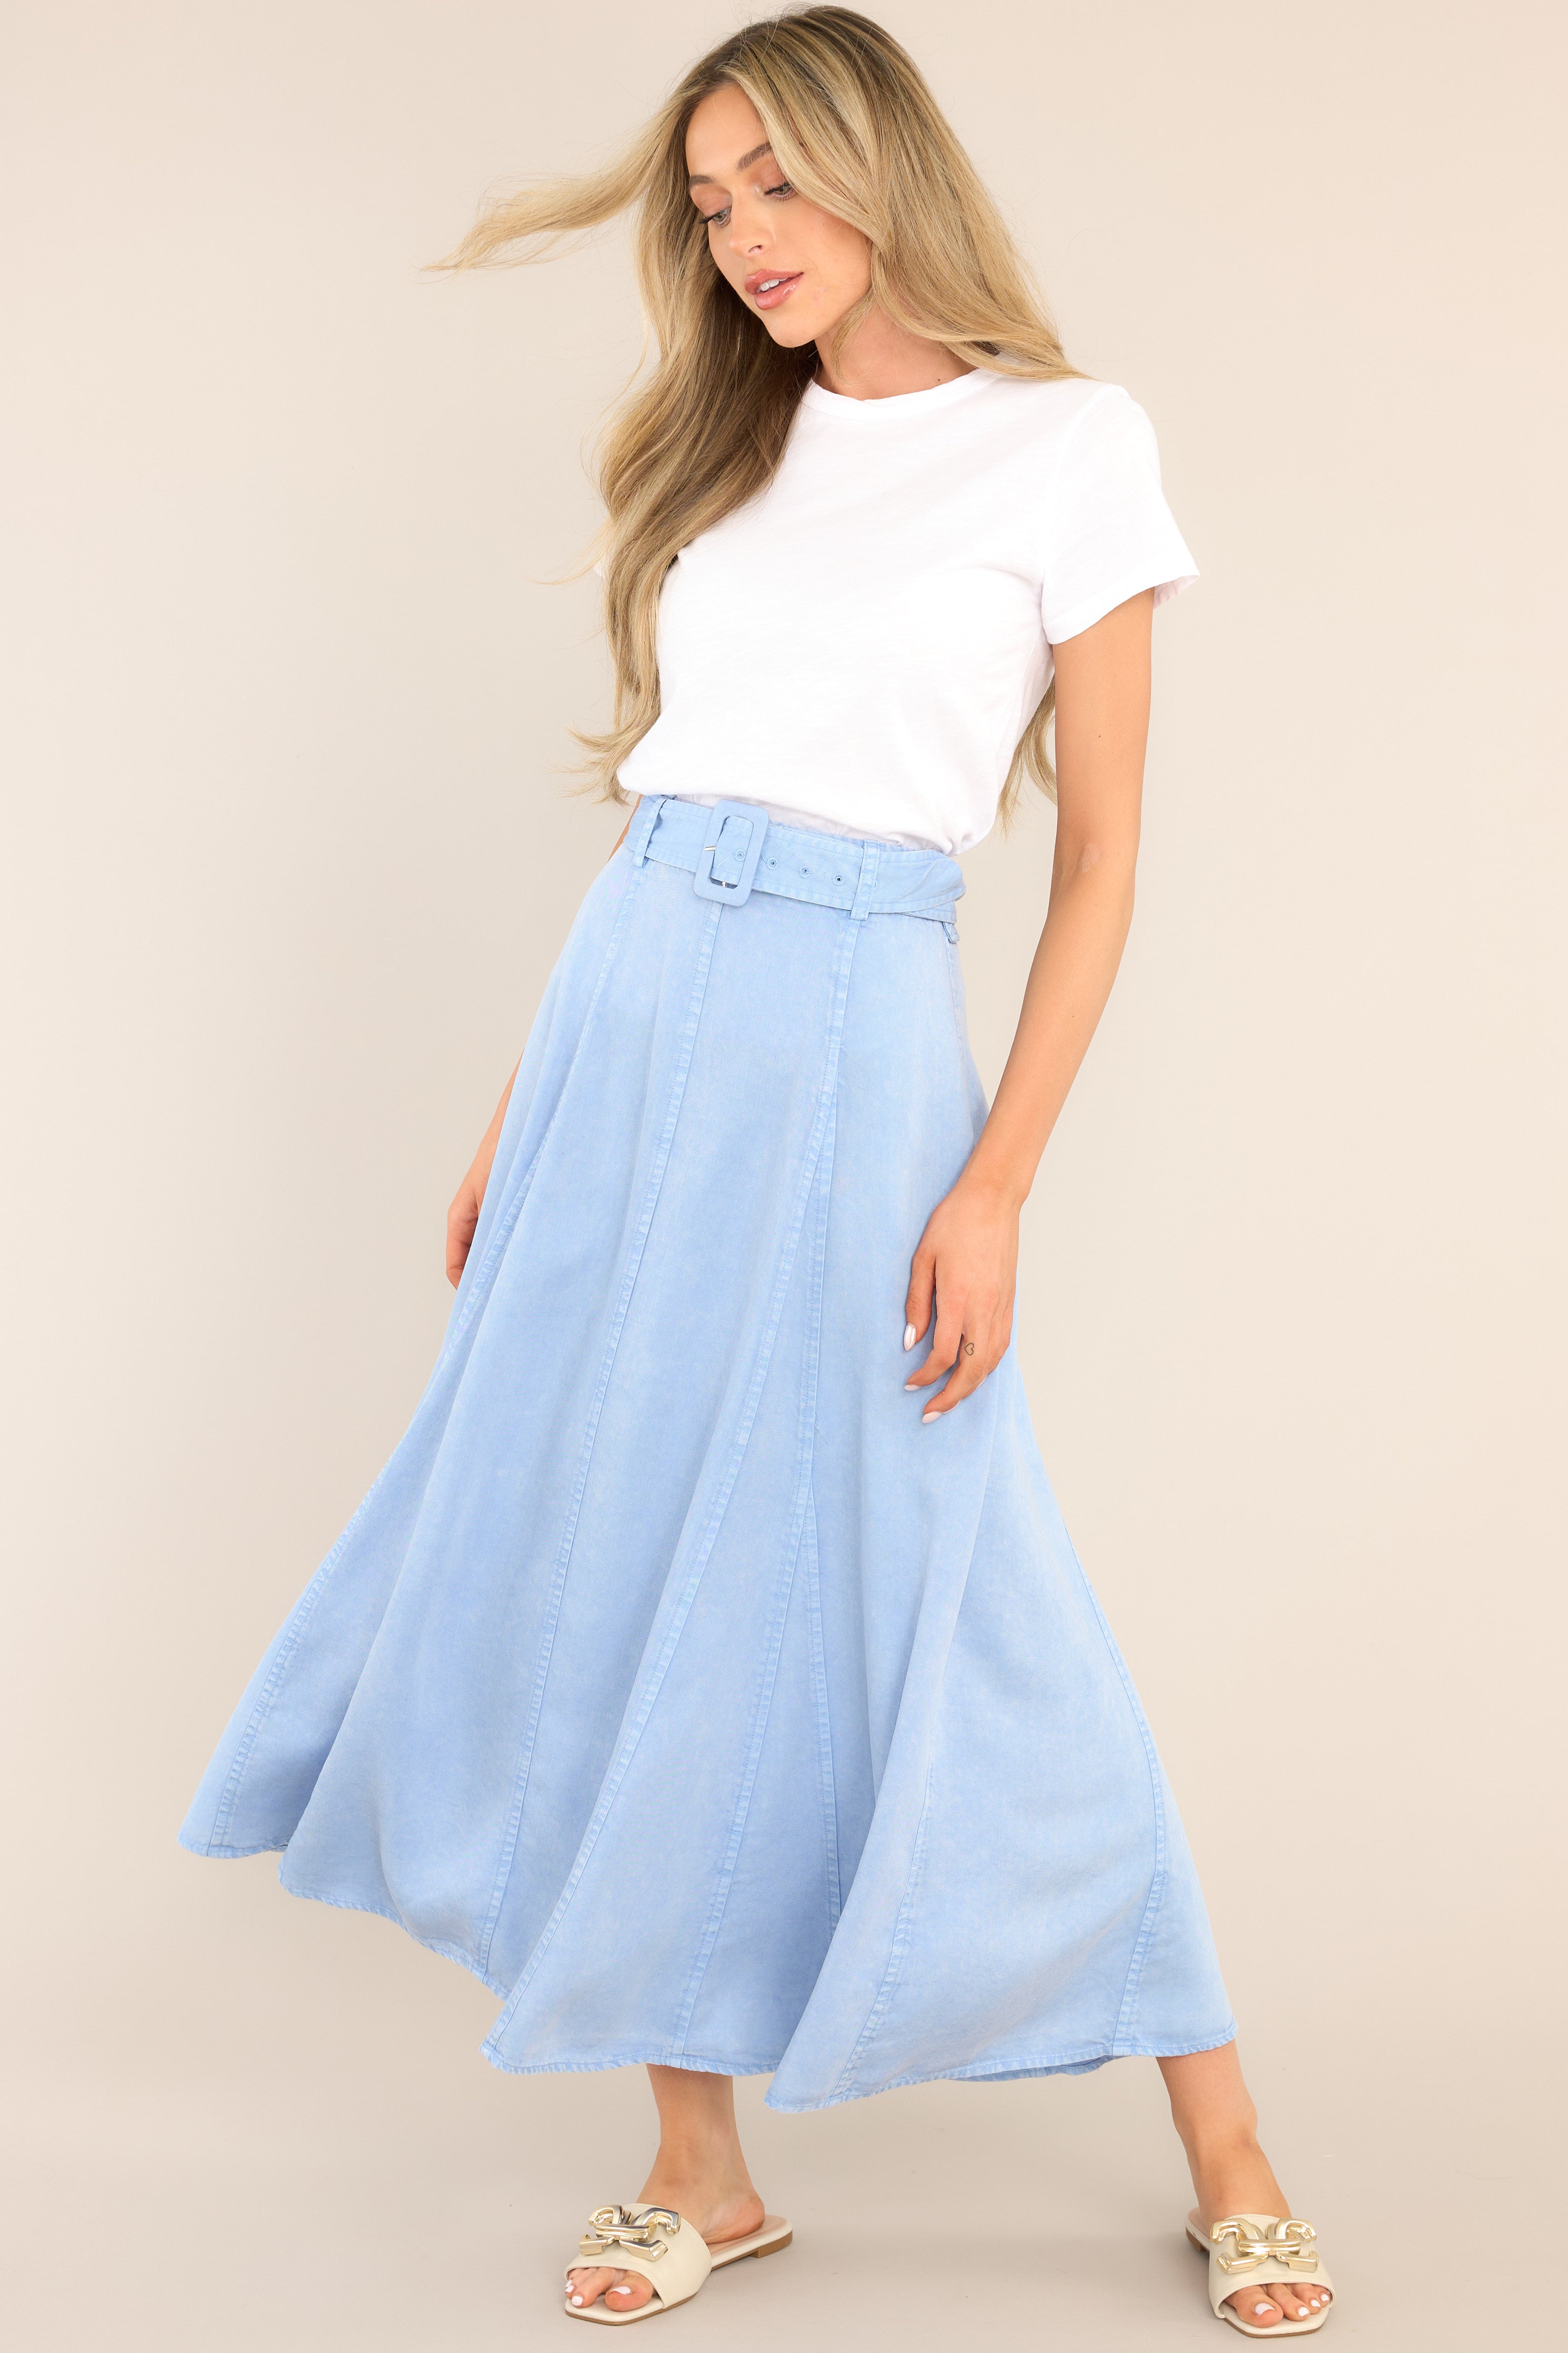 Belted Chambray Maxi Skirt - All Skirts | Red Dress